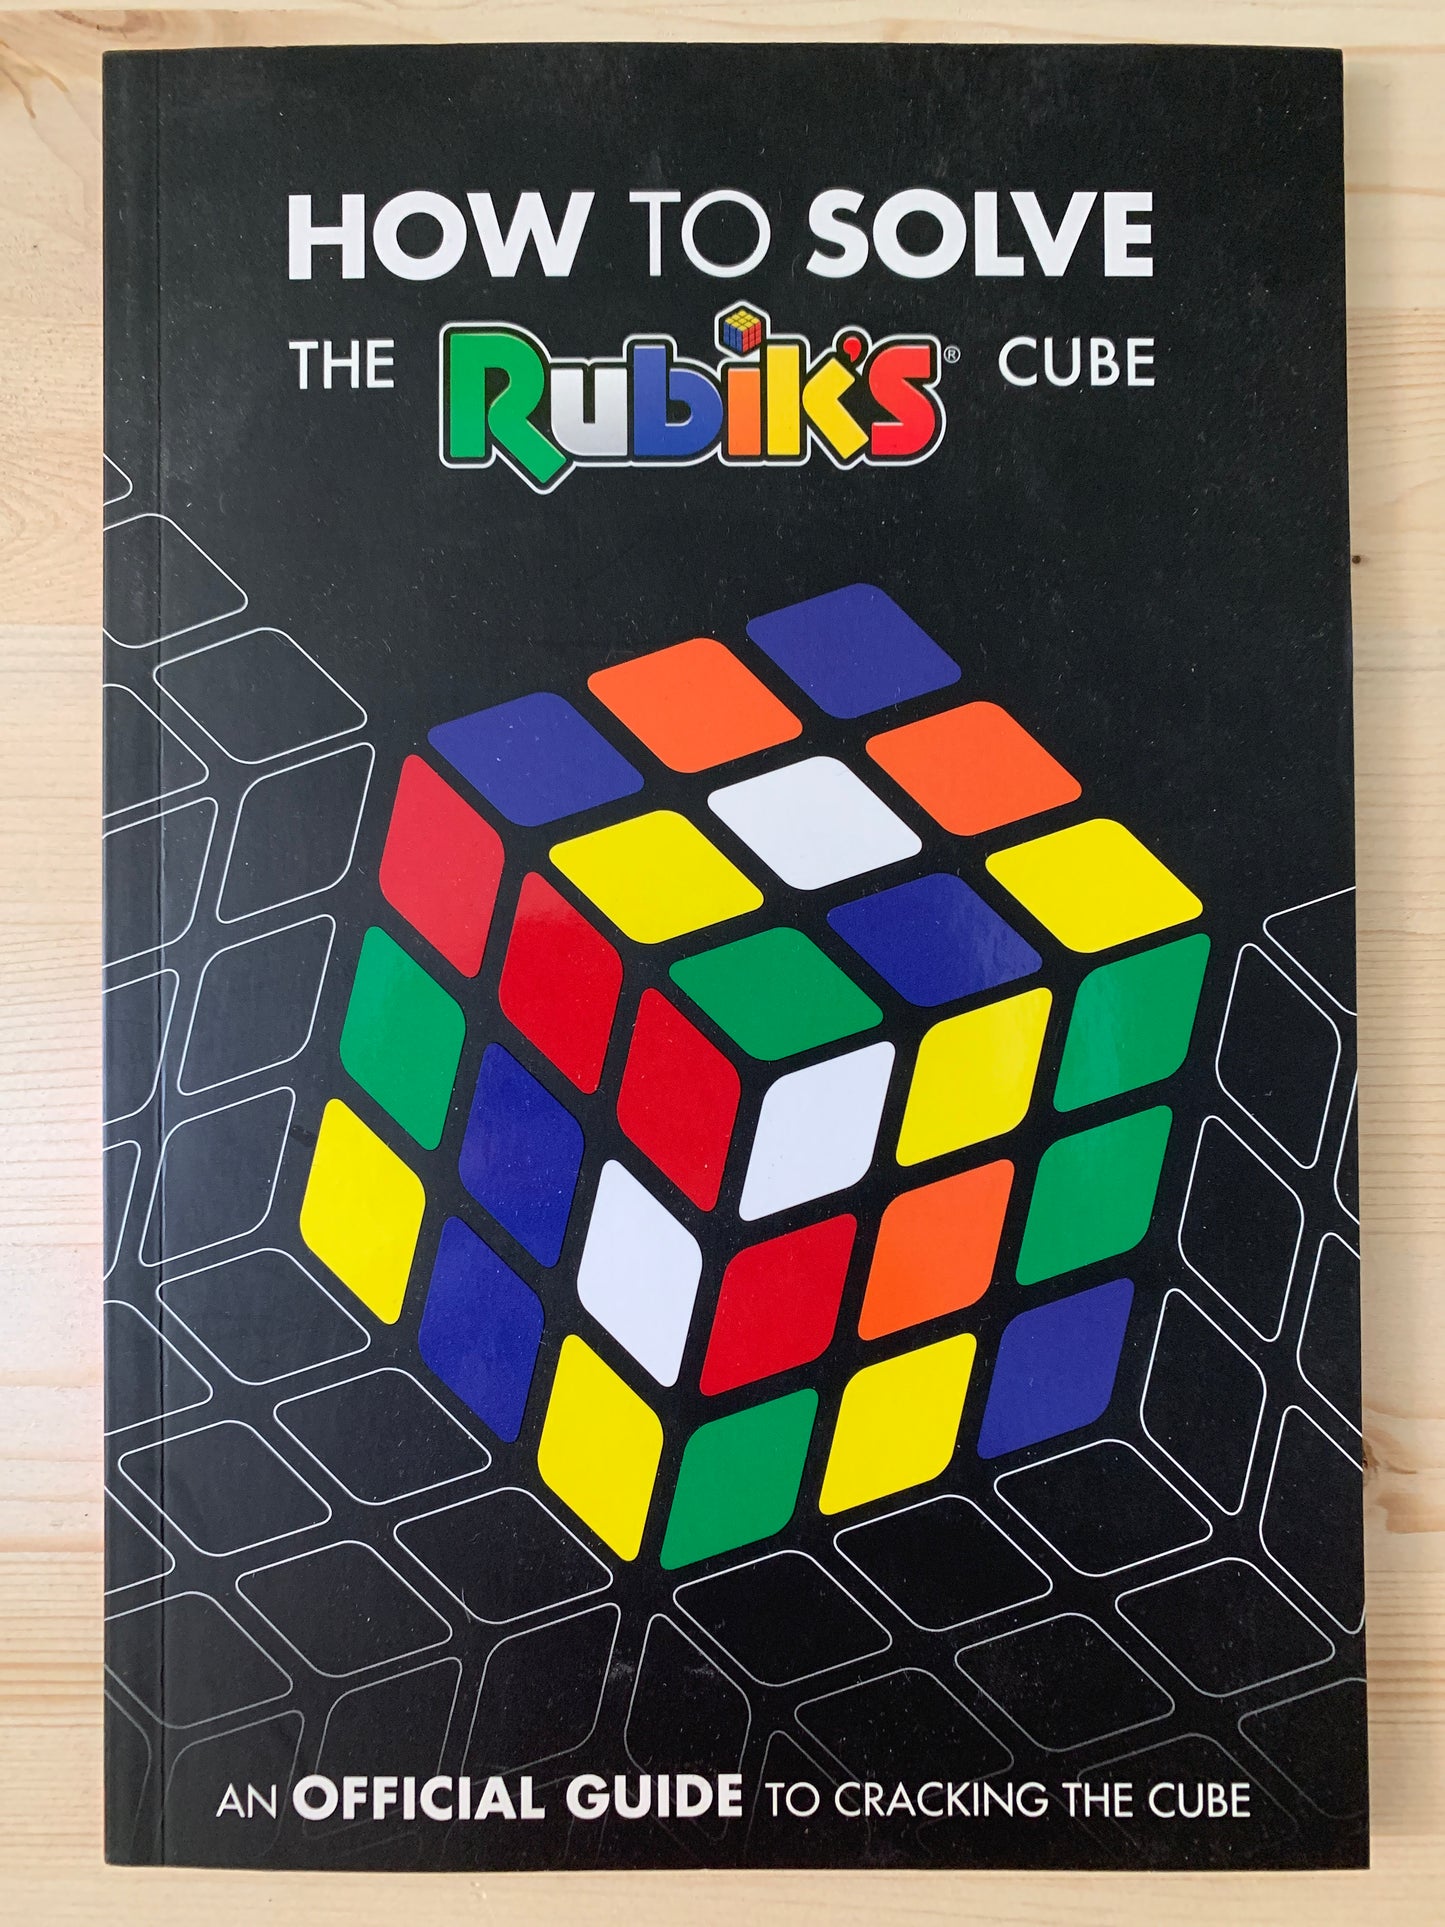 How to Solve the Rubik’s Cube